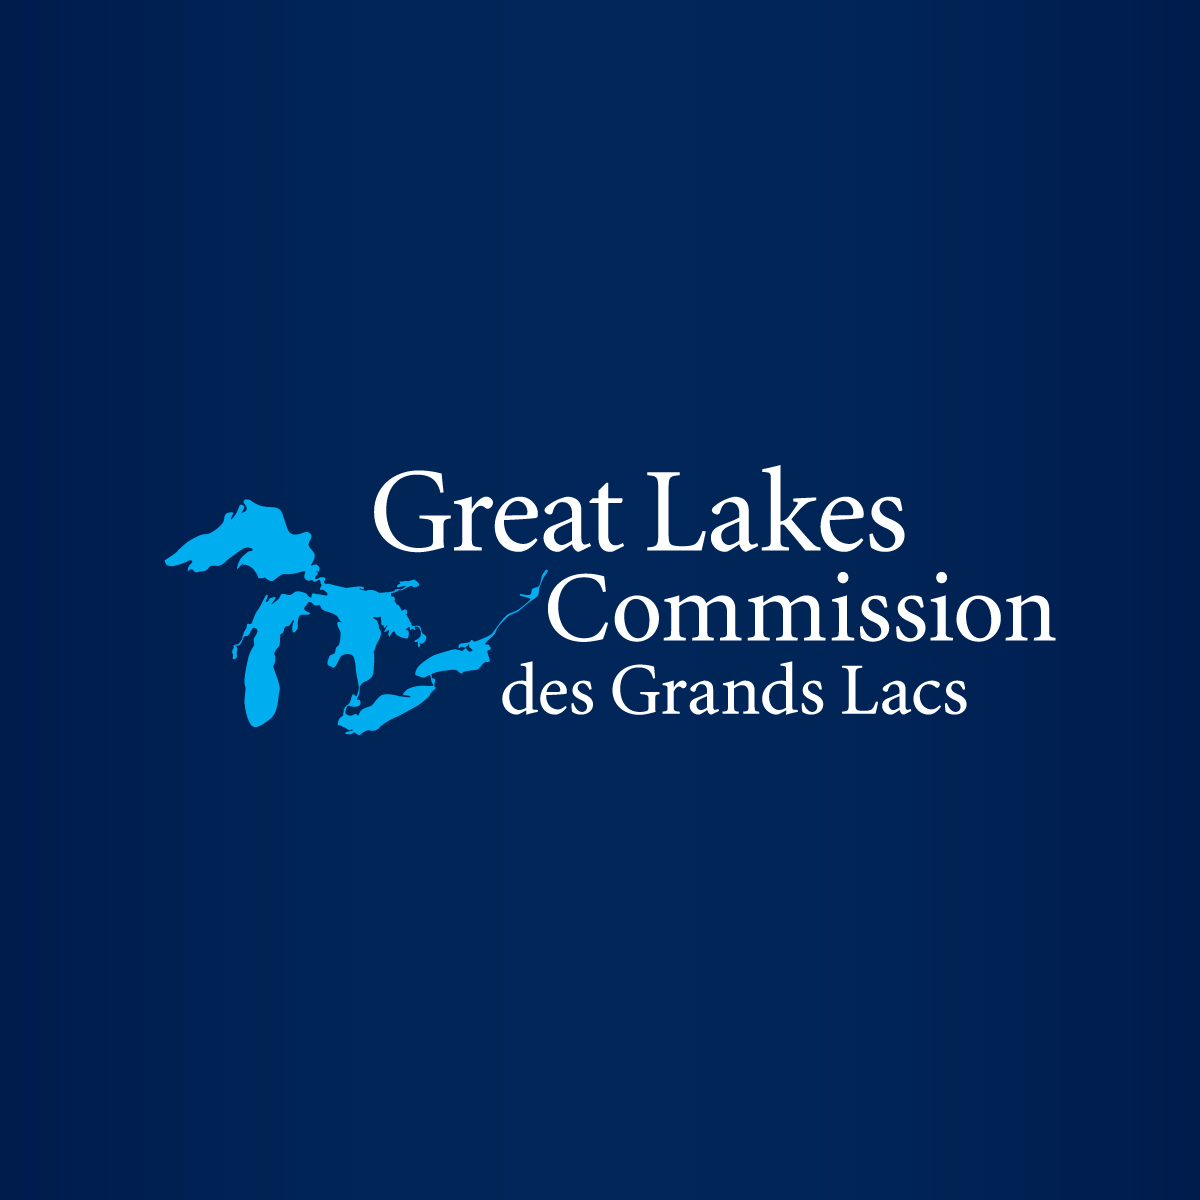 Impact of limiting EPA’s authority over power plant emissions on the Great Lakes